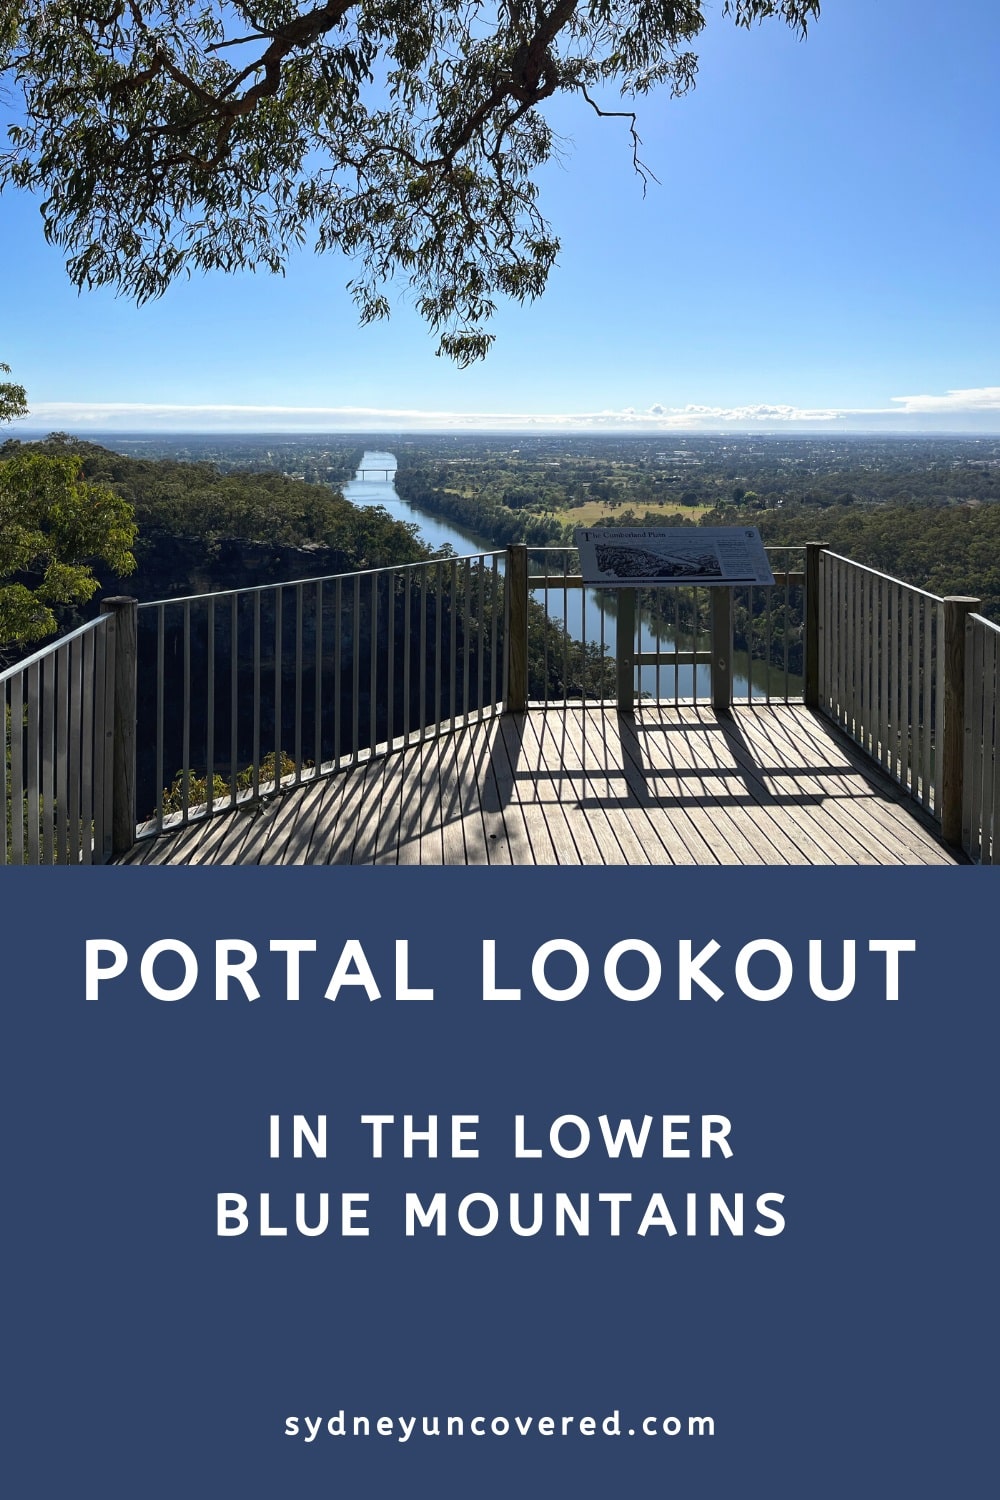 Portal Lookout in the Lower Blue Mountains